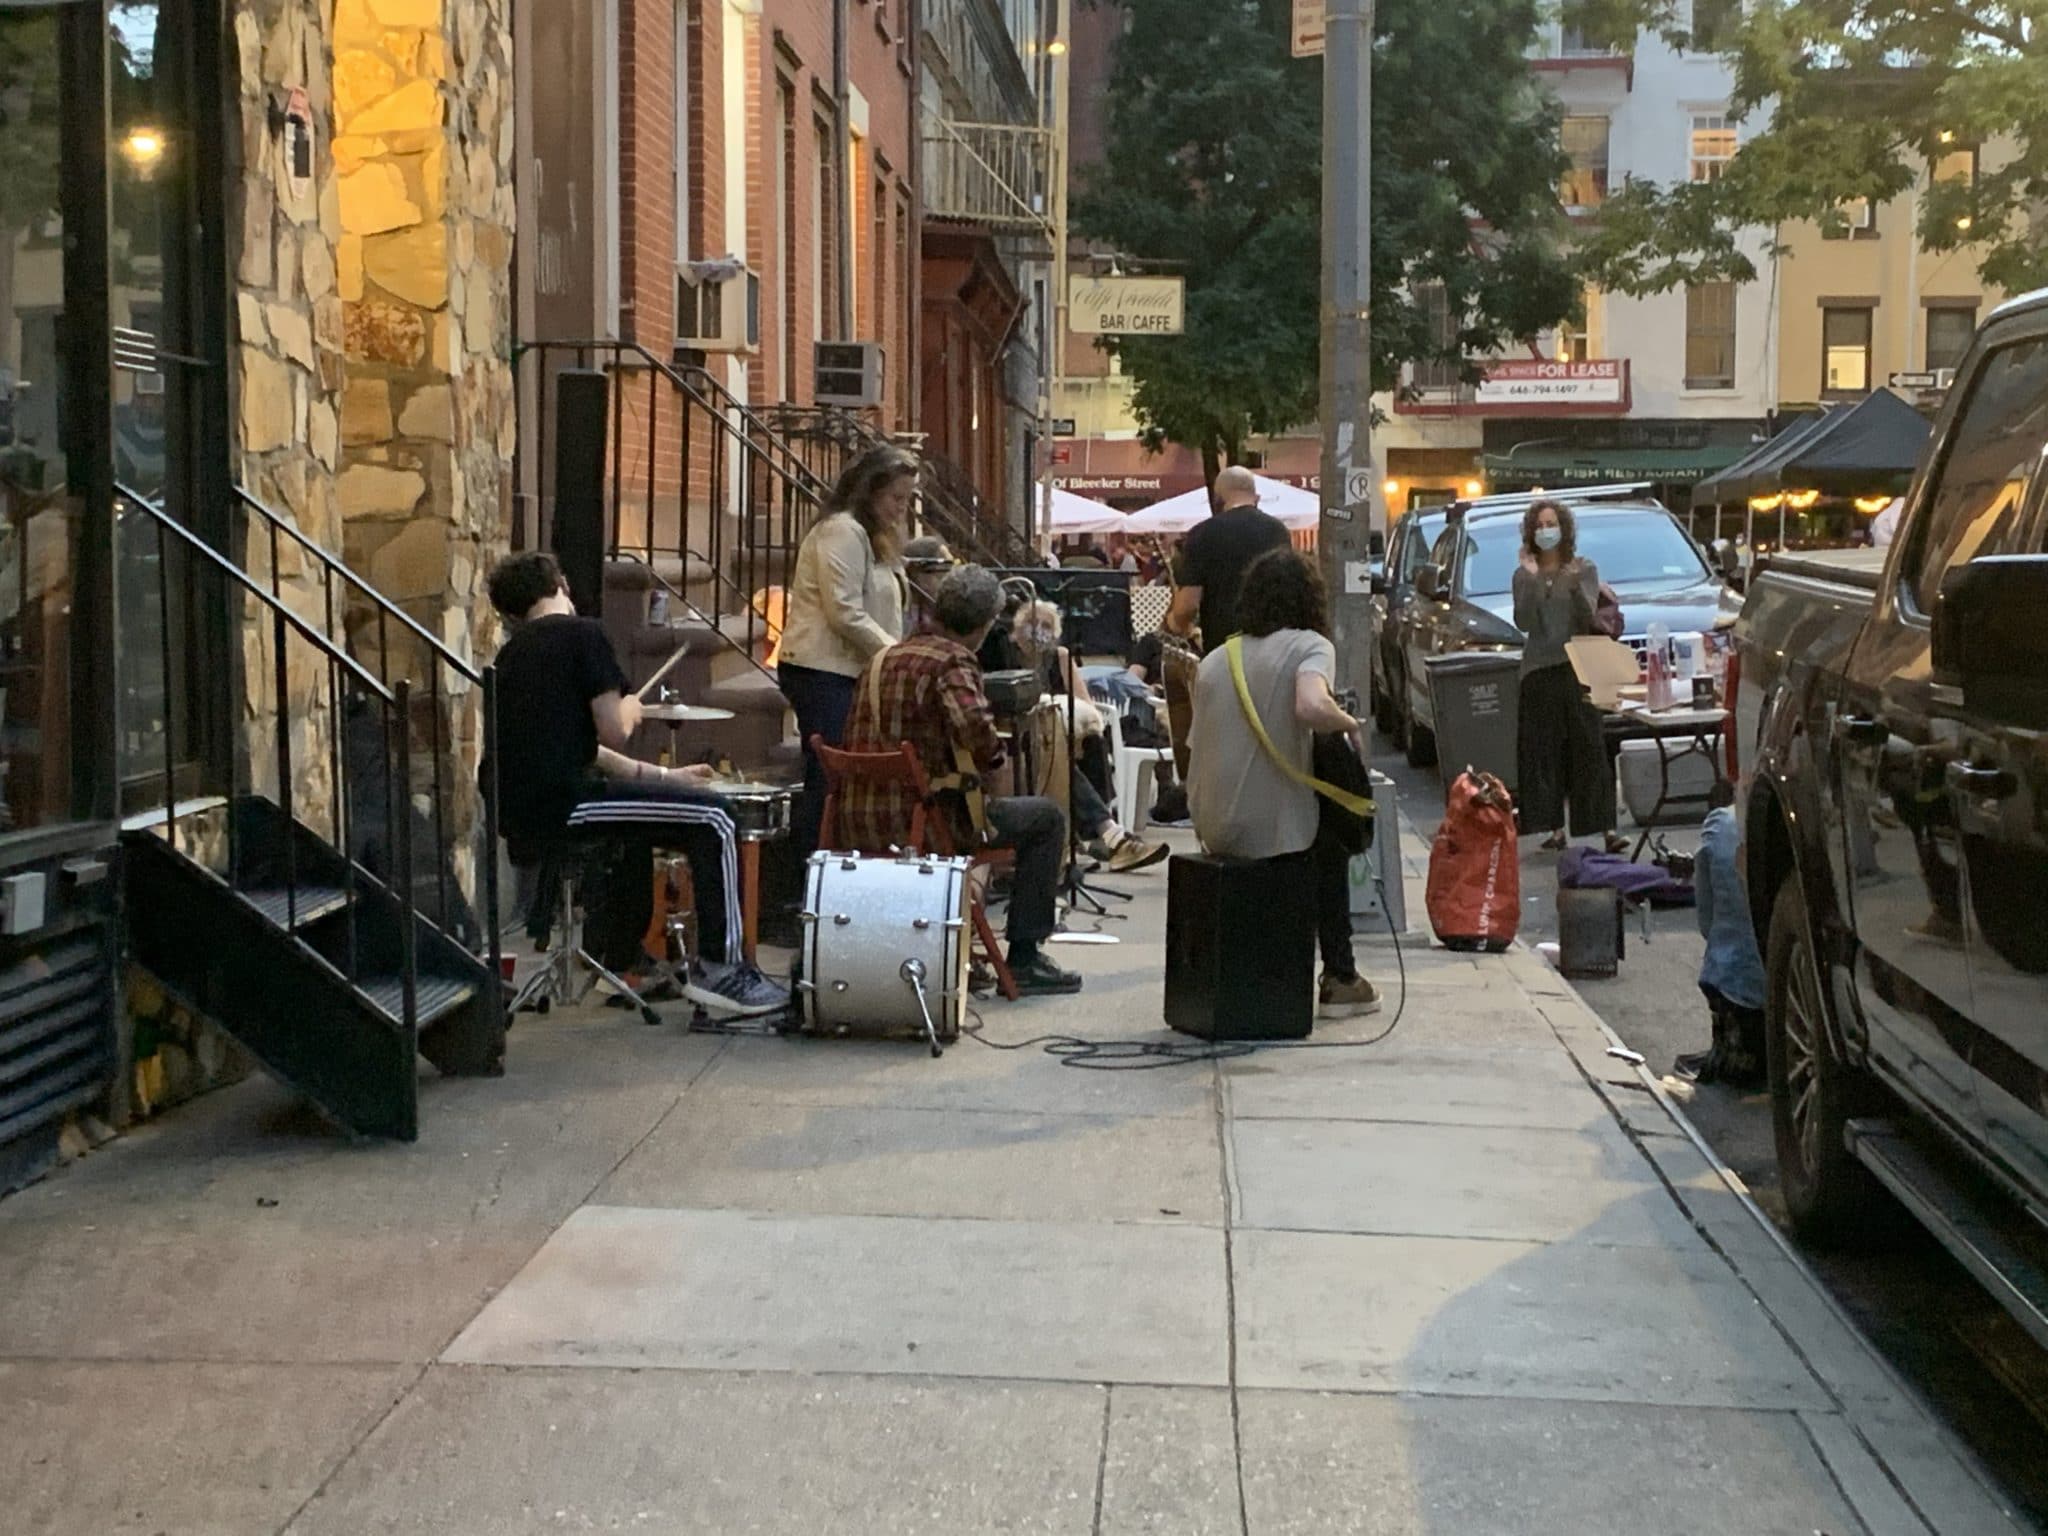 Musicians playing on the street